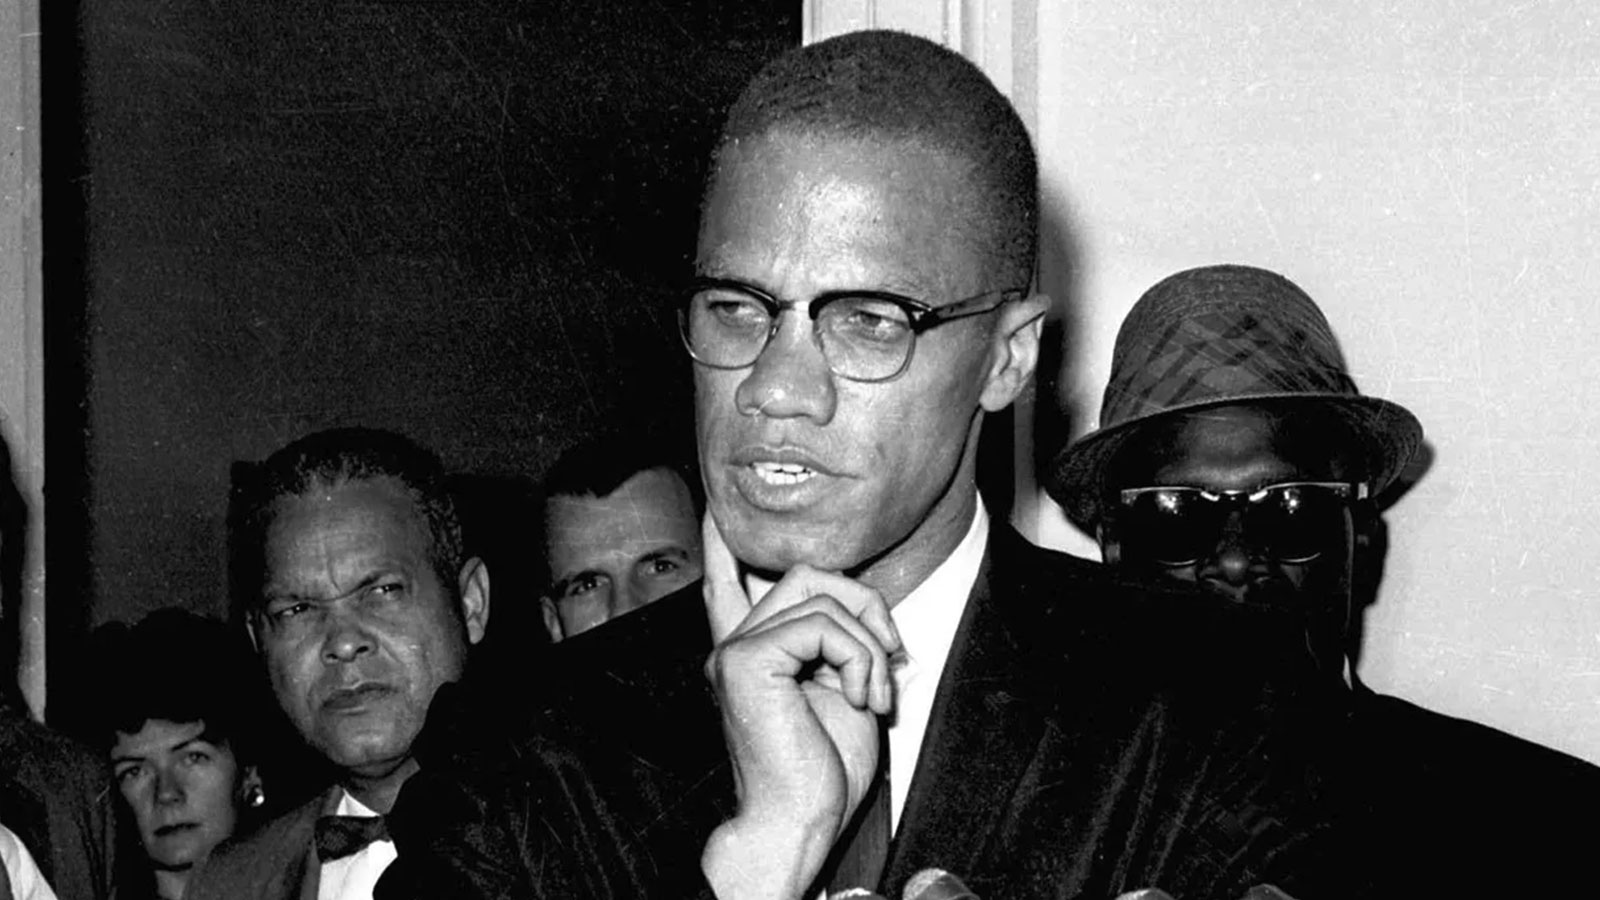 Civil rights leader Malcolm X becomes 1st Black honoree in Nebraska Hall of Fame